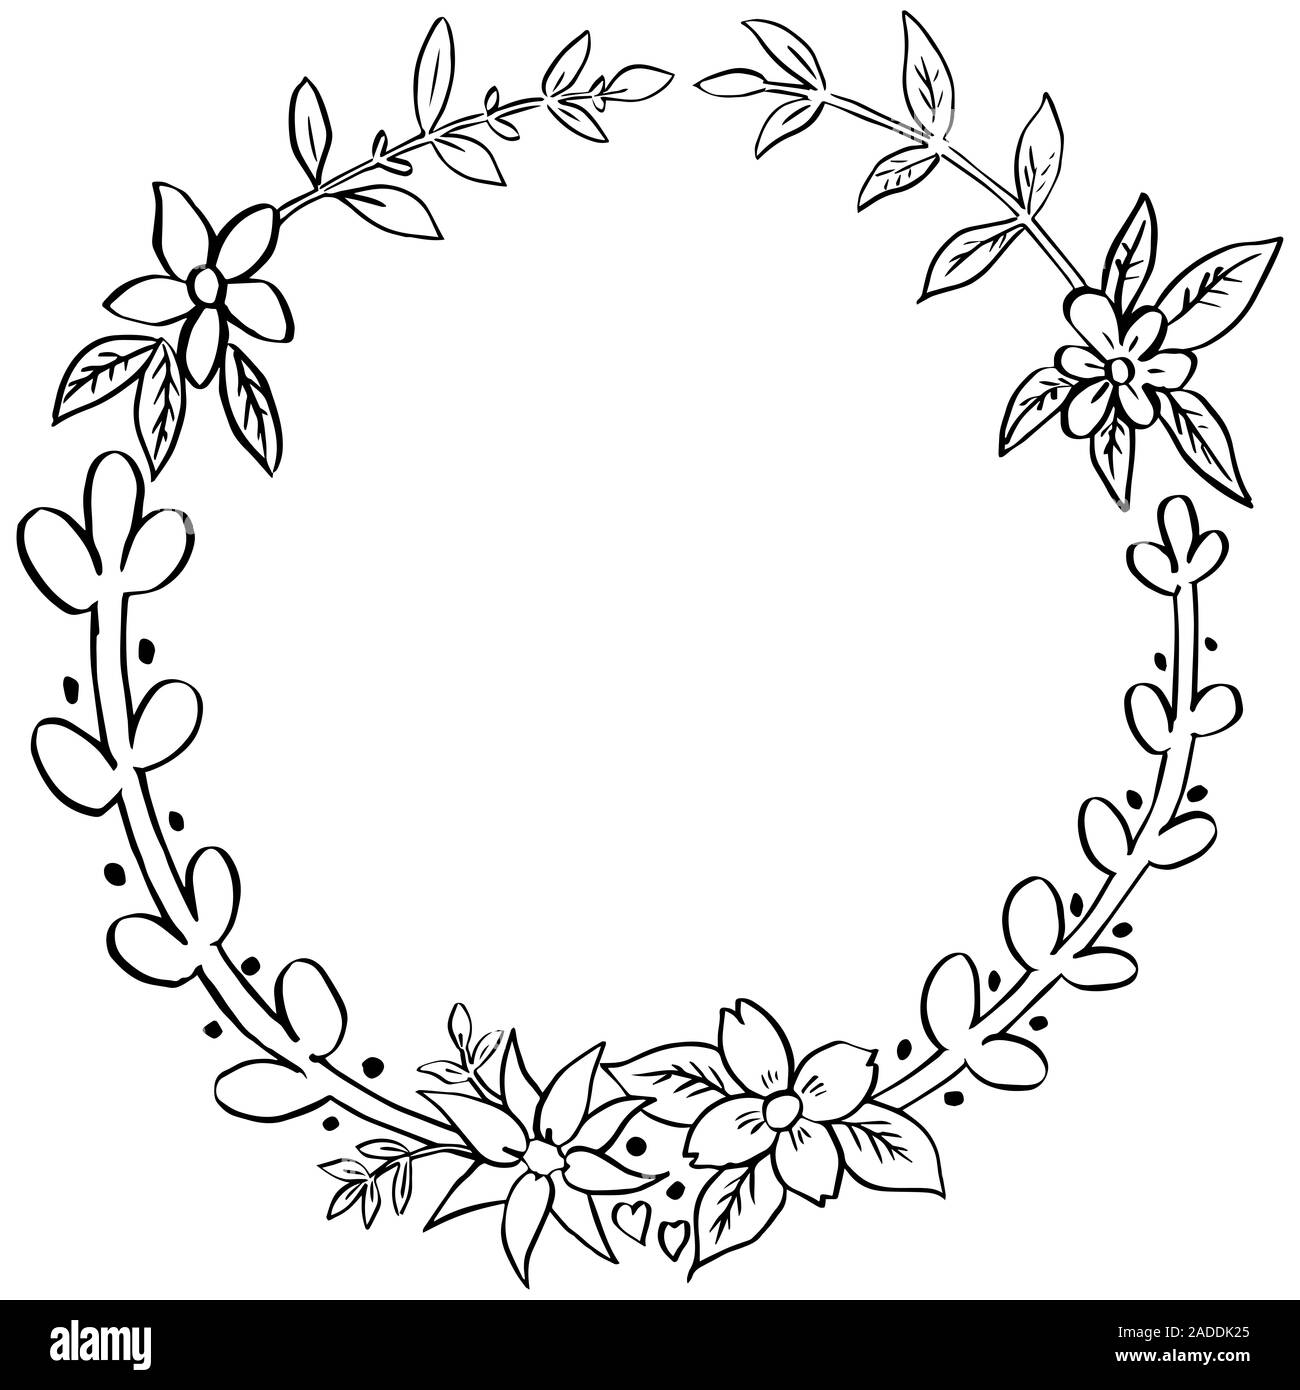 Floral wreath with leaves, branches,  isolate on white background, Ink drawing, frame element doodle style, hand drawn vector illustration. Stock Photo